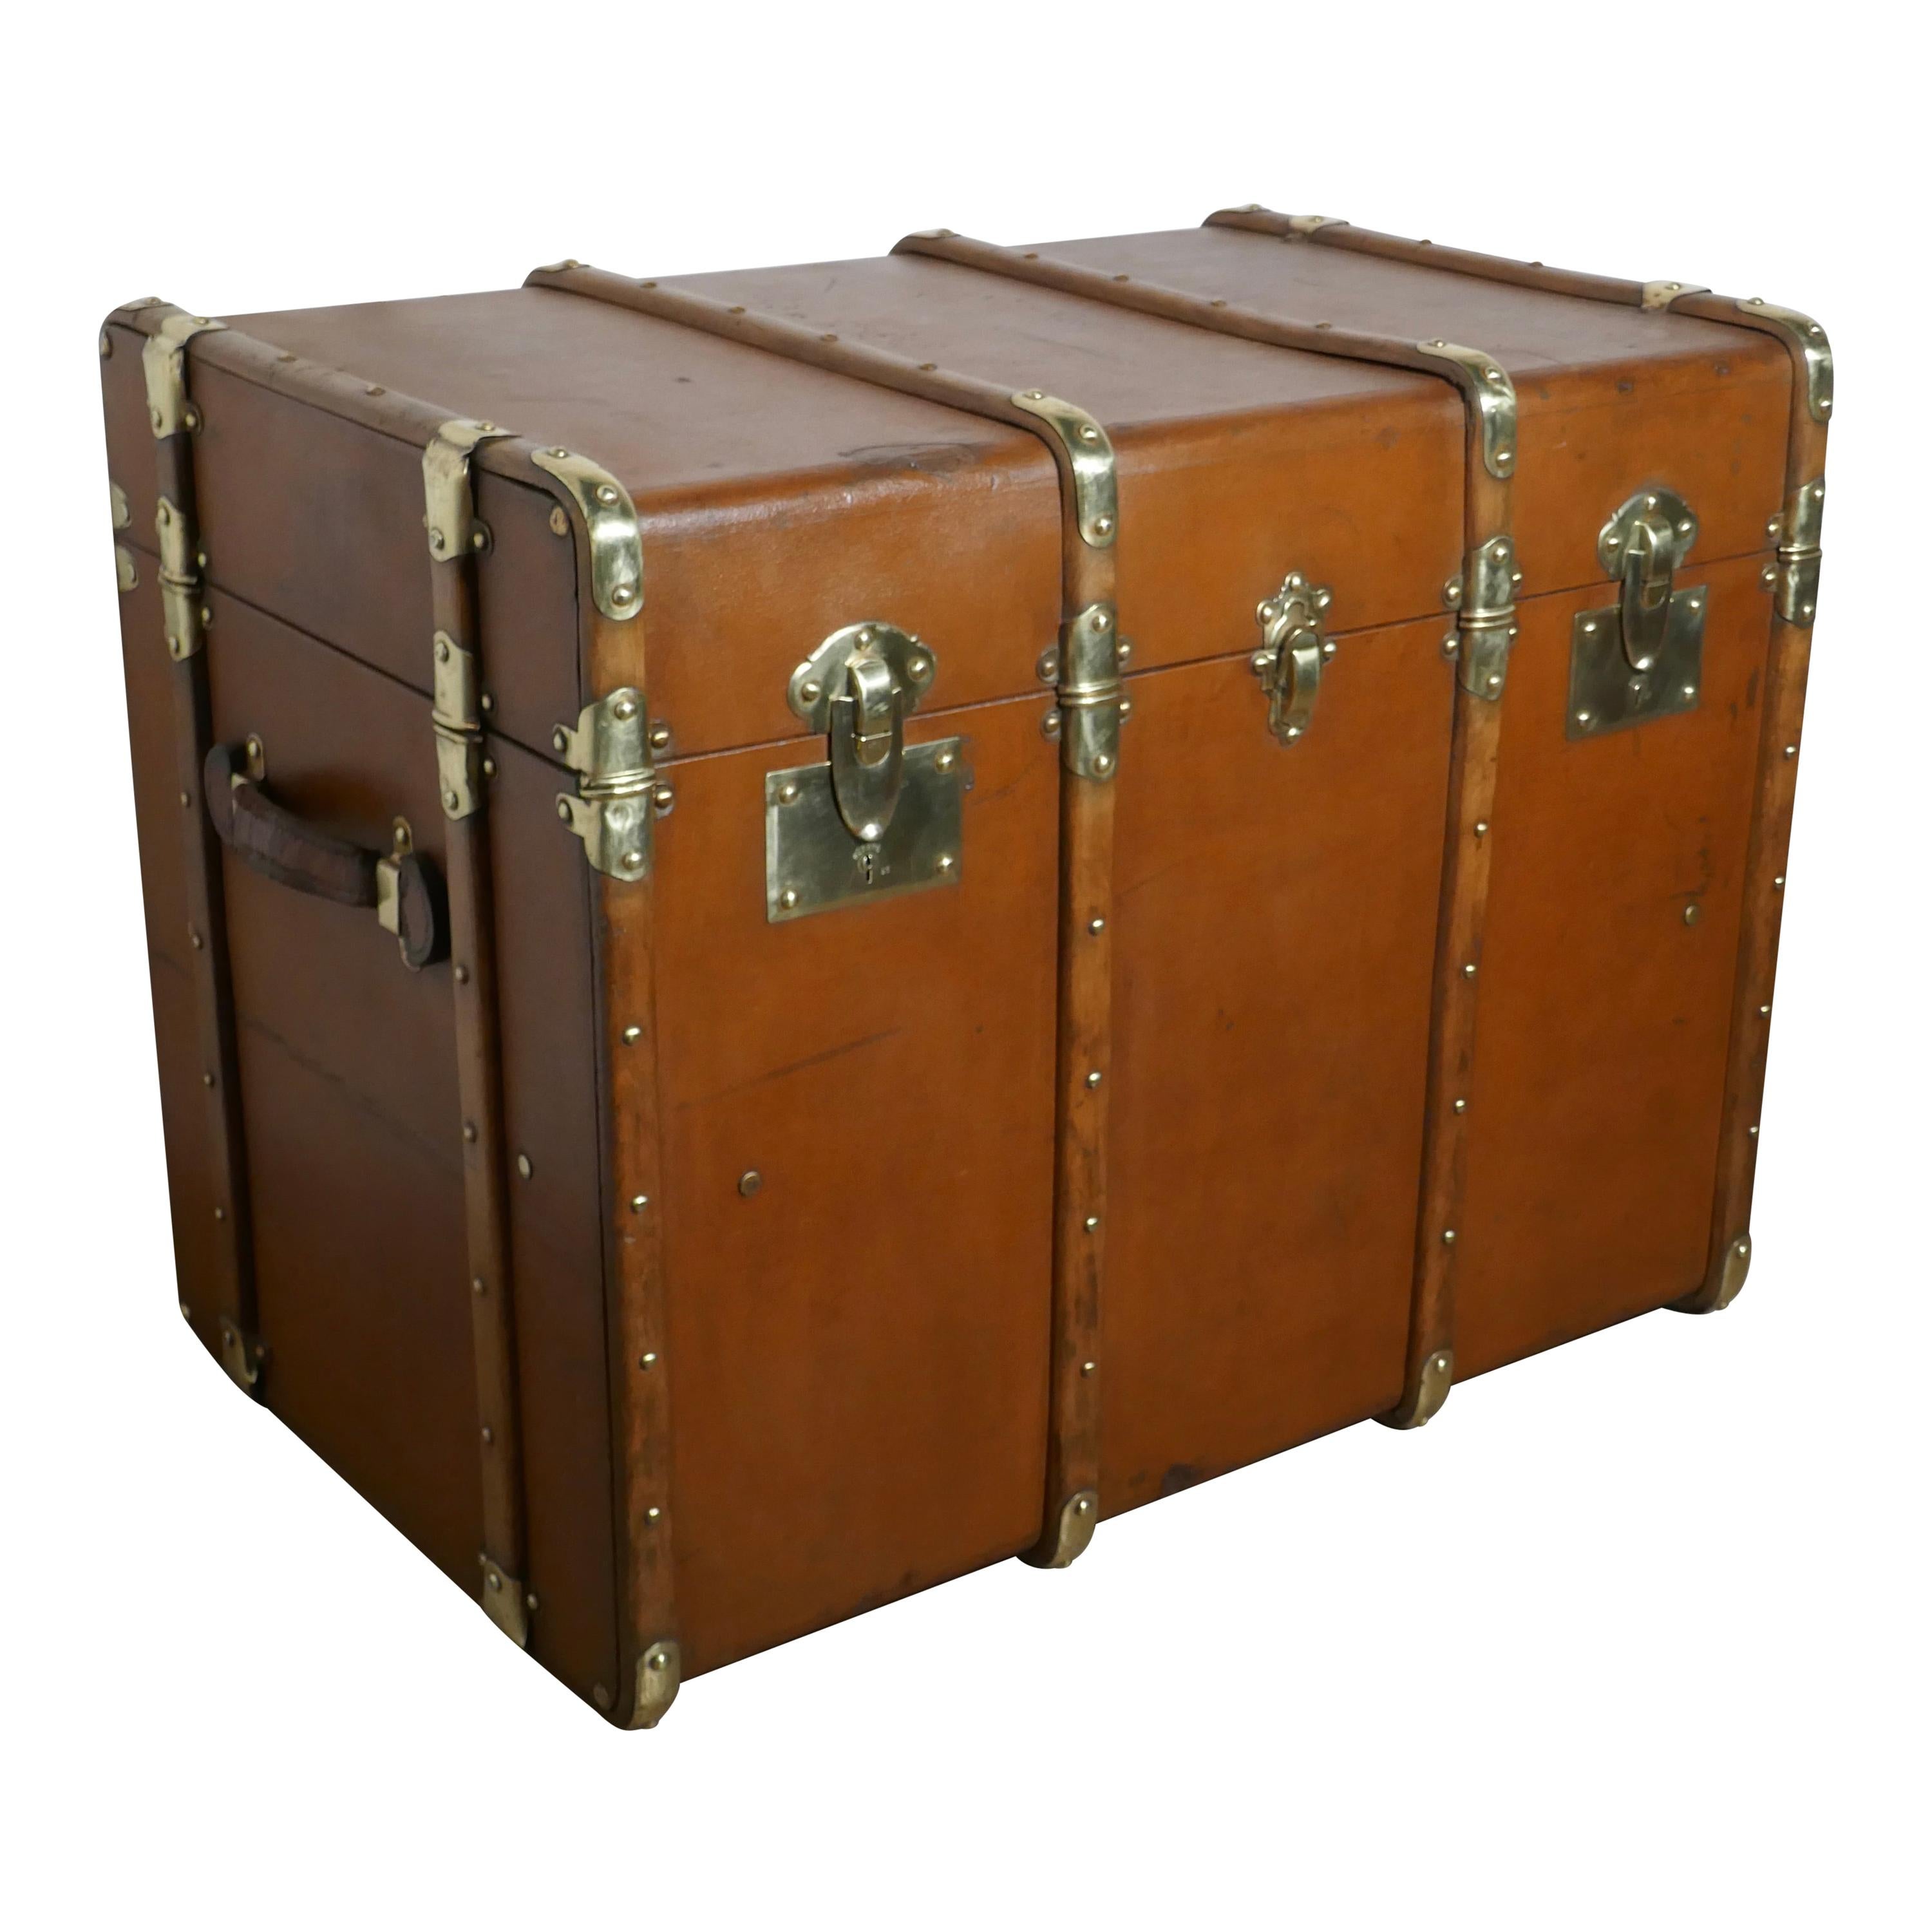 Large Tan Canvas, Wood and Brass Bound Steamer Trunk